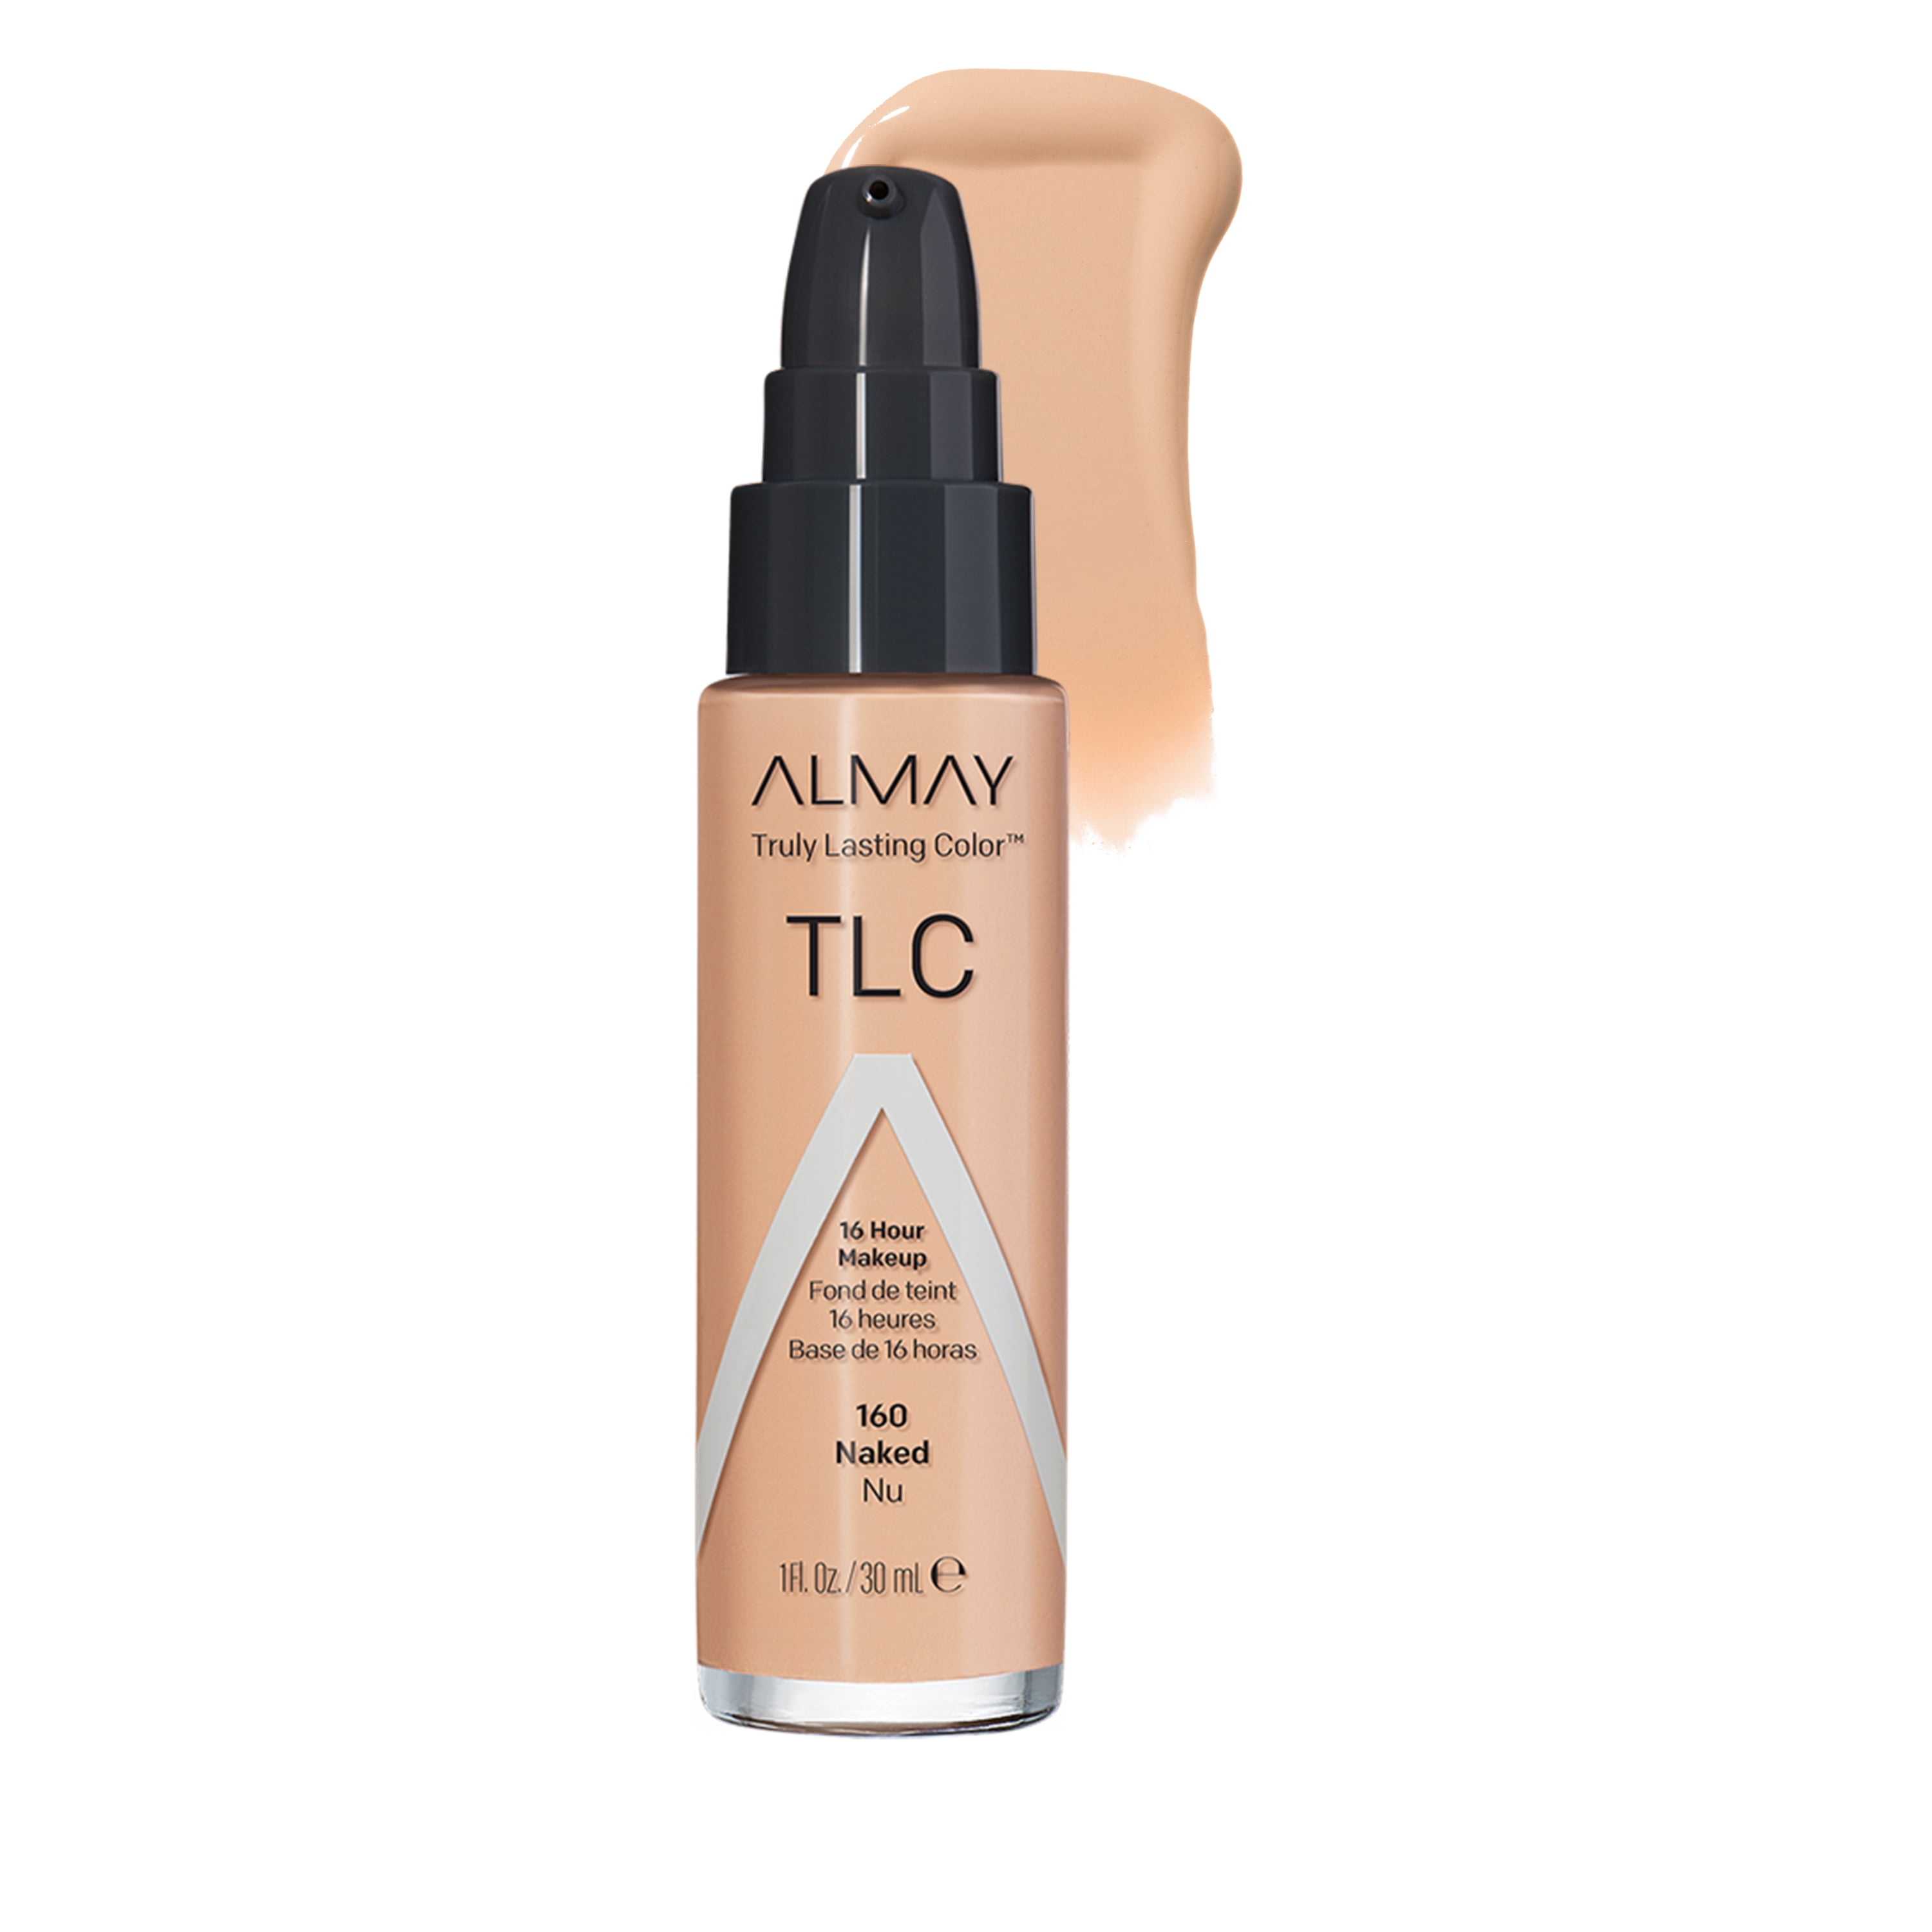 Almay Truly Lasting Color Liquid Makeup, Hypoallergenic, Cruelty, Oil, Fragrance Free, Long Wearing Foundation, 1 fl oz - 160 Naked